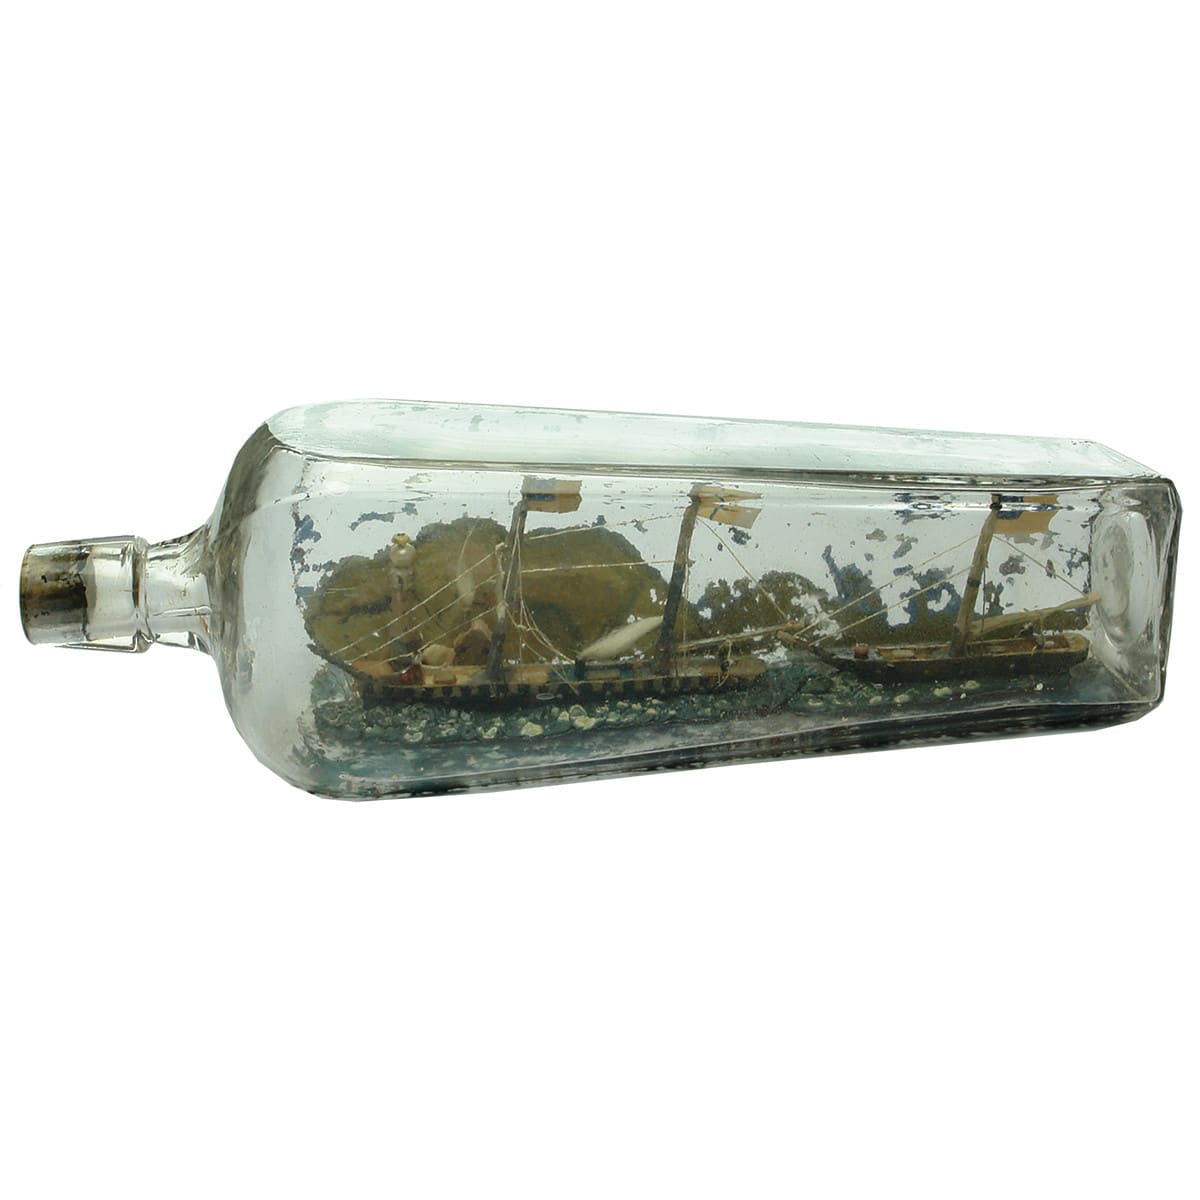 Ships in a bottle. Early clear Gin with two ships, lighthouse scene built inside.